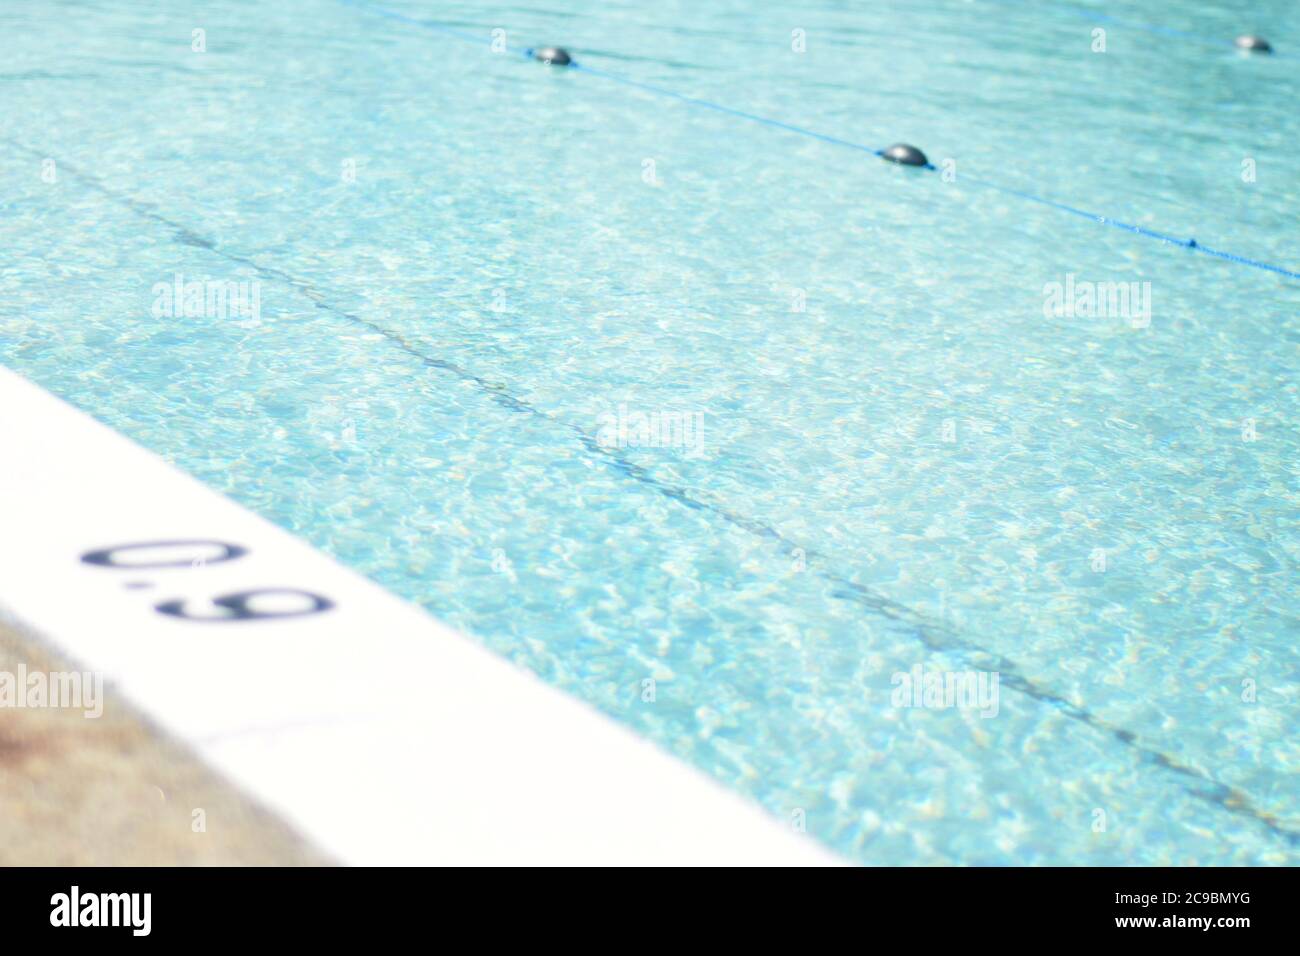 Lido, outdoor pool with lane ropes on a sunny day Stock Photo